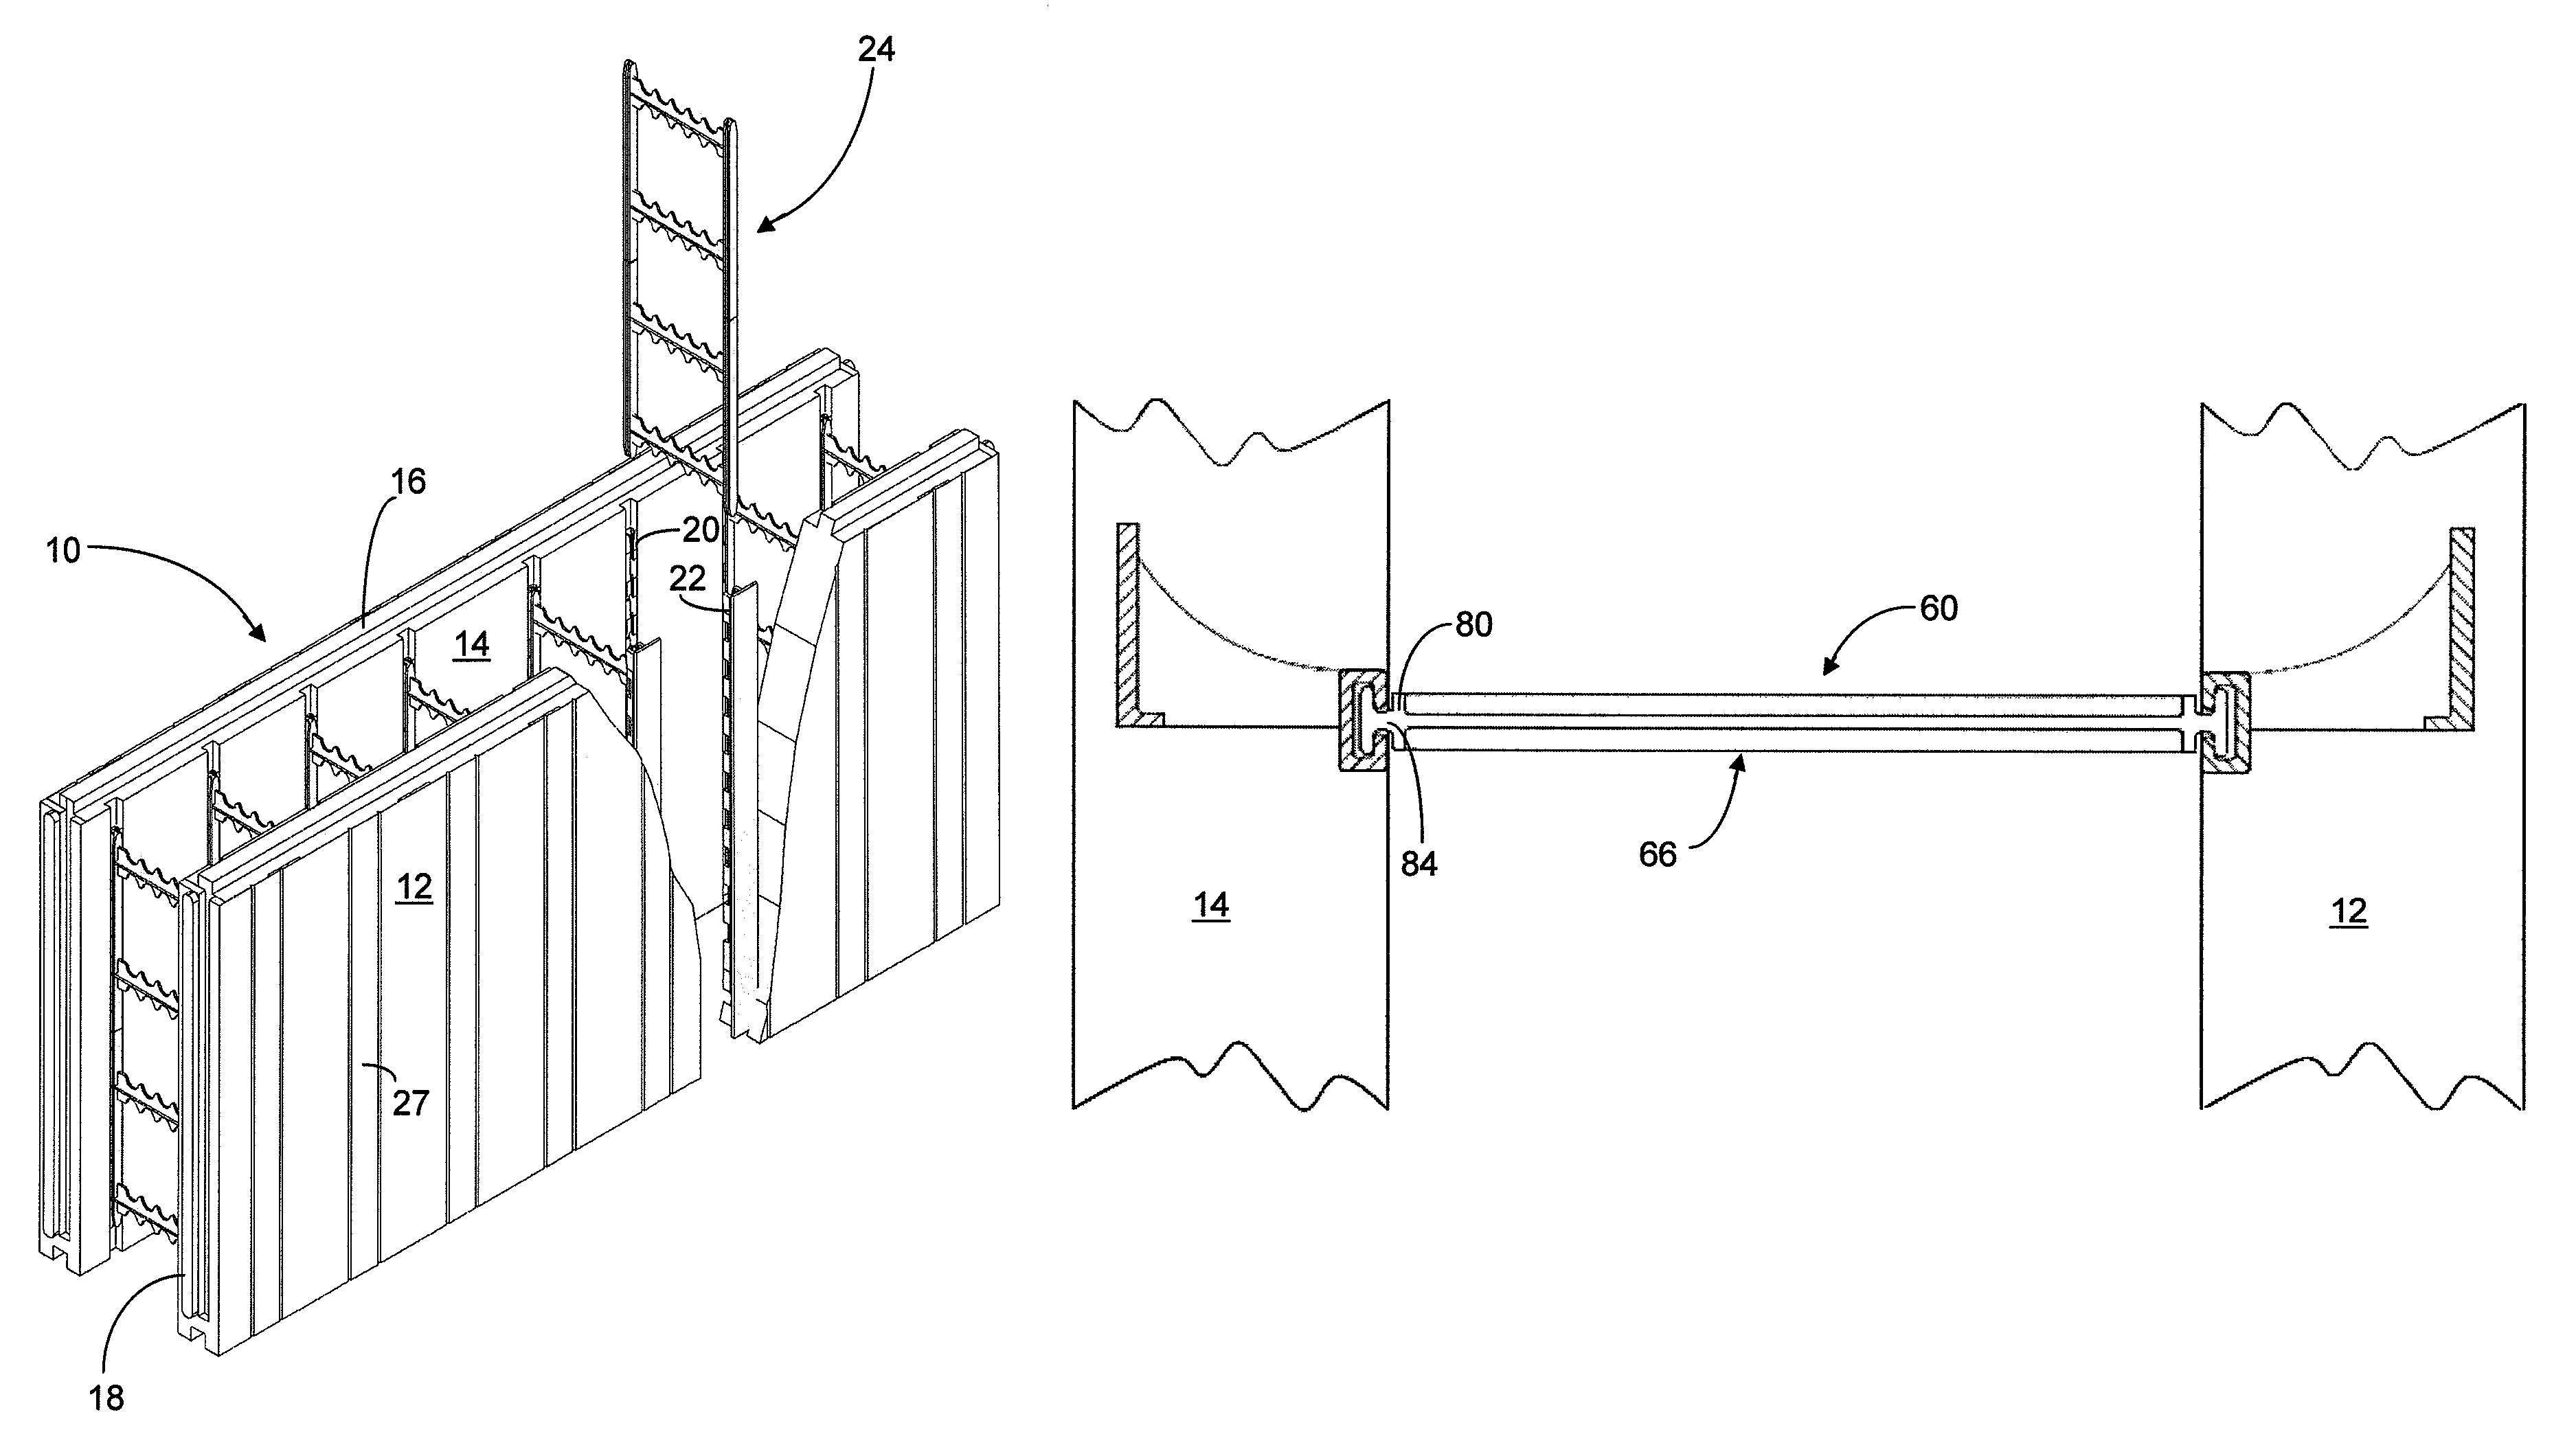 Insulating concrete form having locking mechanism engaging tie with anchor